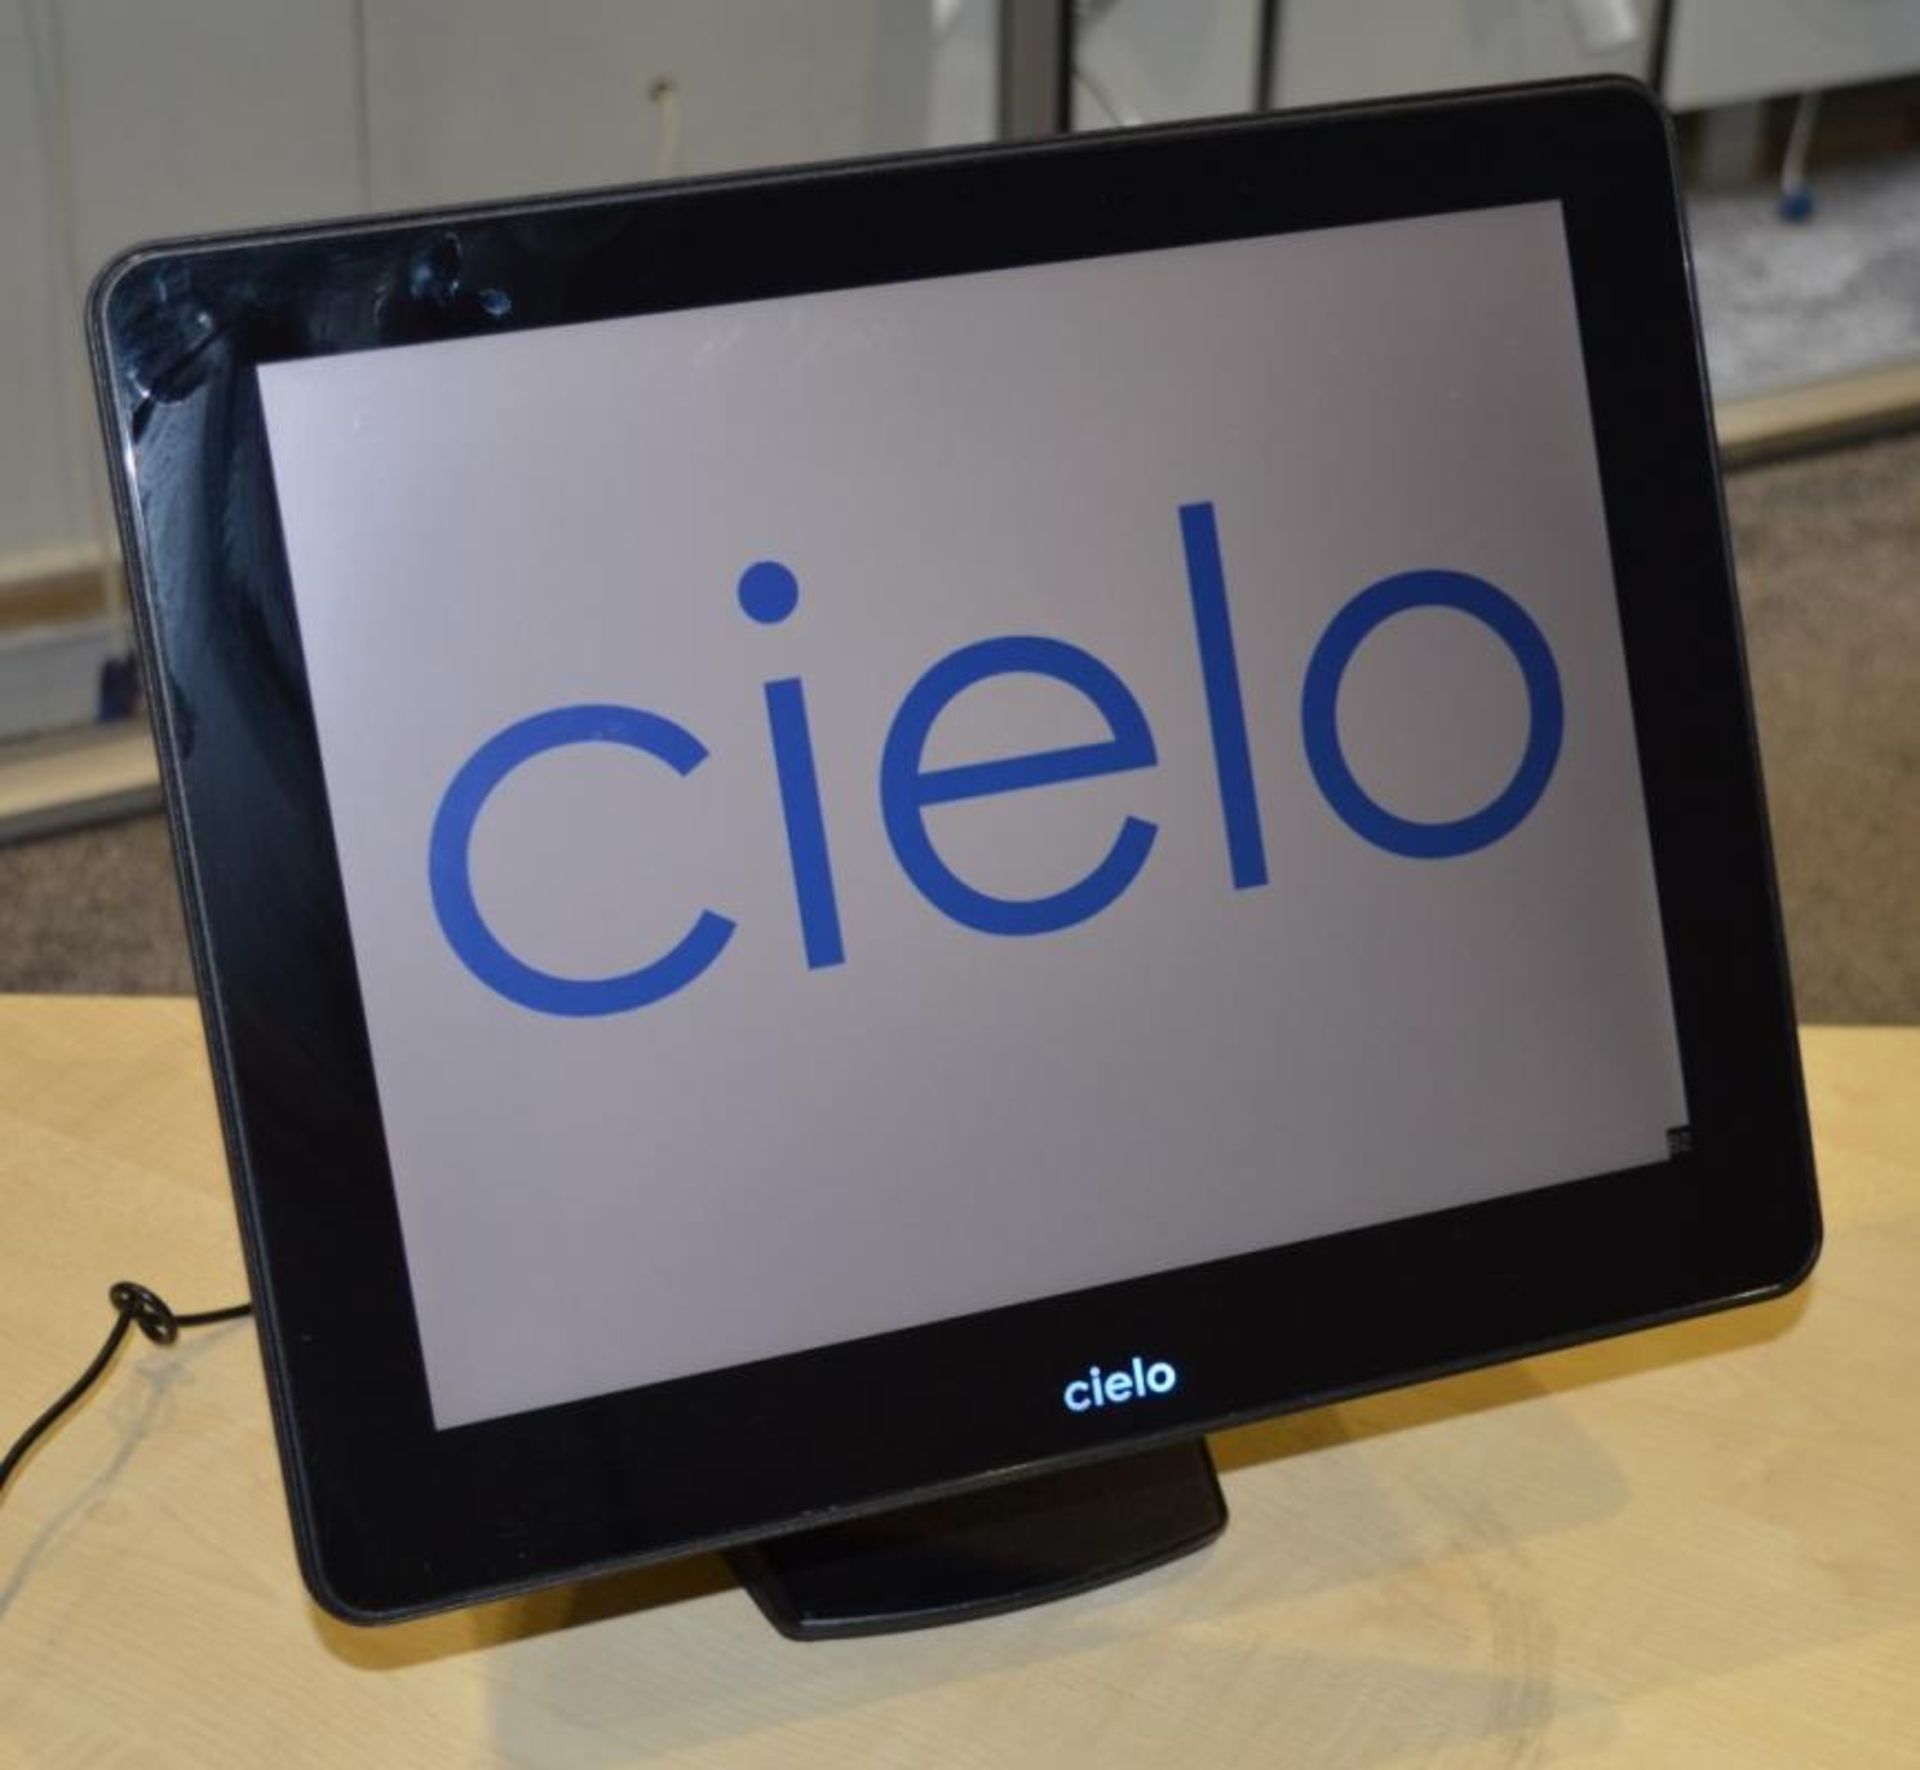 1 x Cielo AP-3615 All in One Desktop Computer POS System - Features Include 15 Inch Touch Screen,